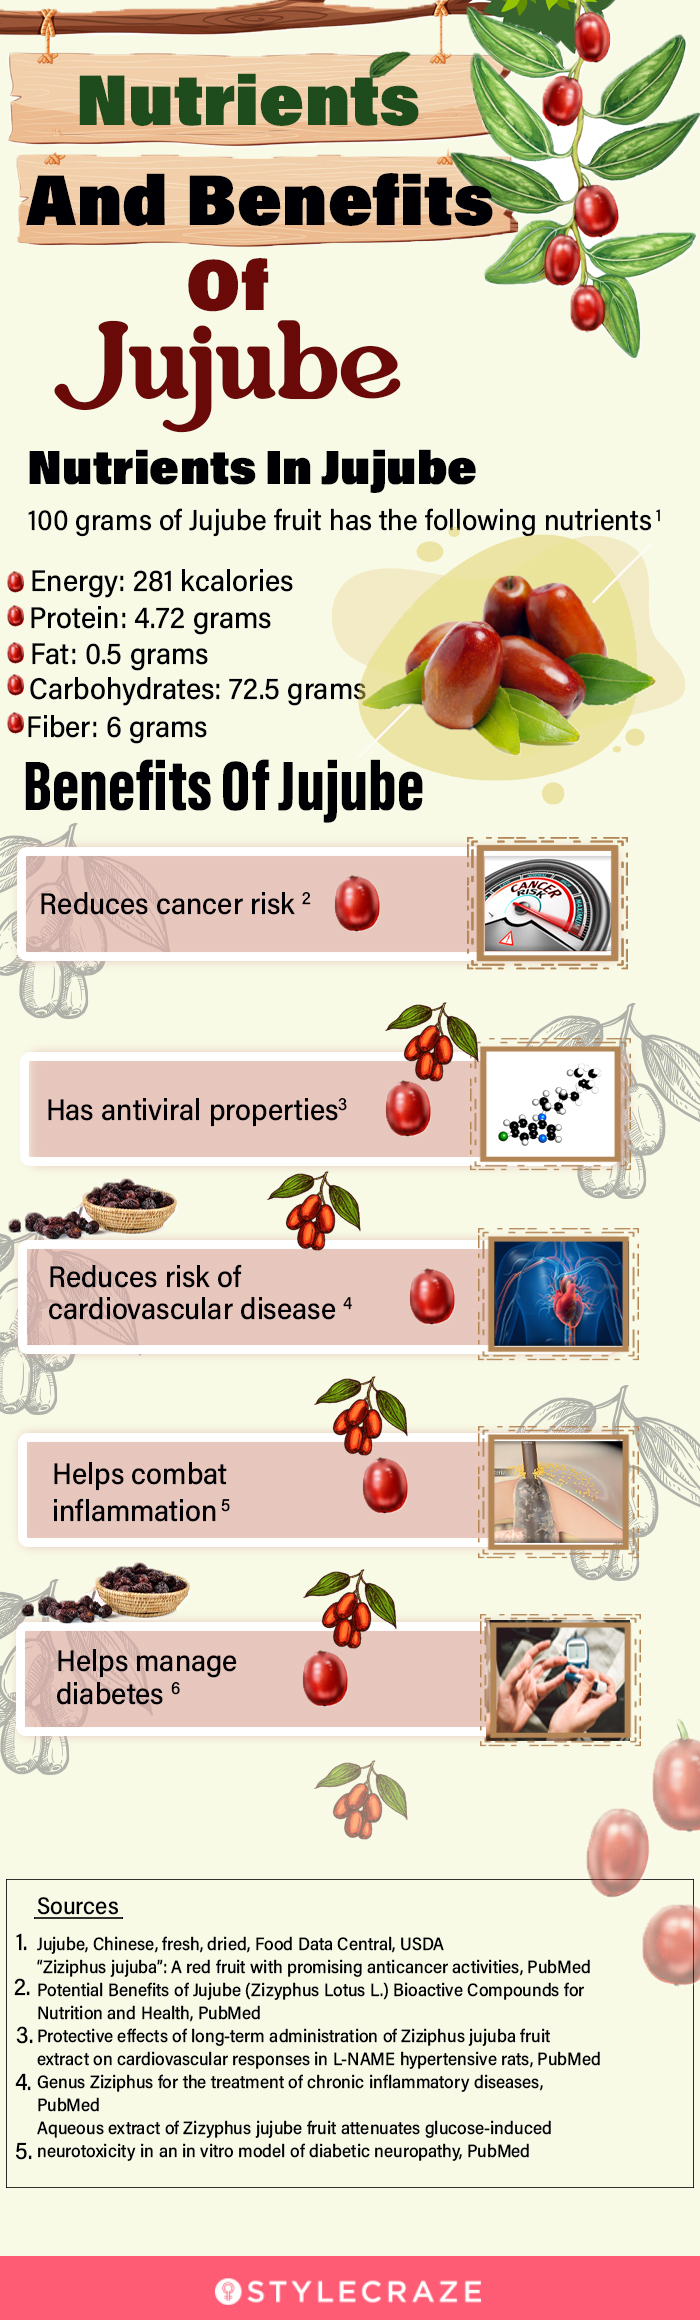 nutrients and benefits of jujube [infographic]